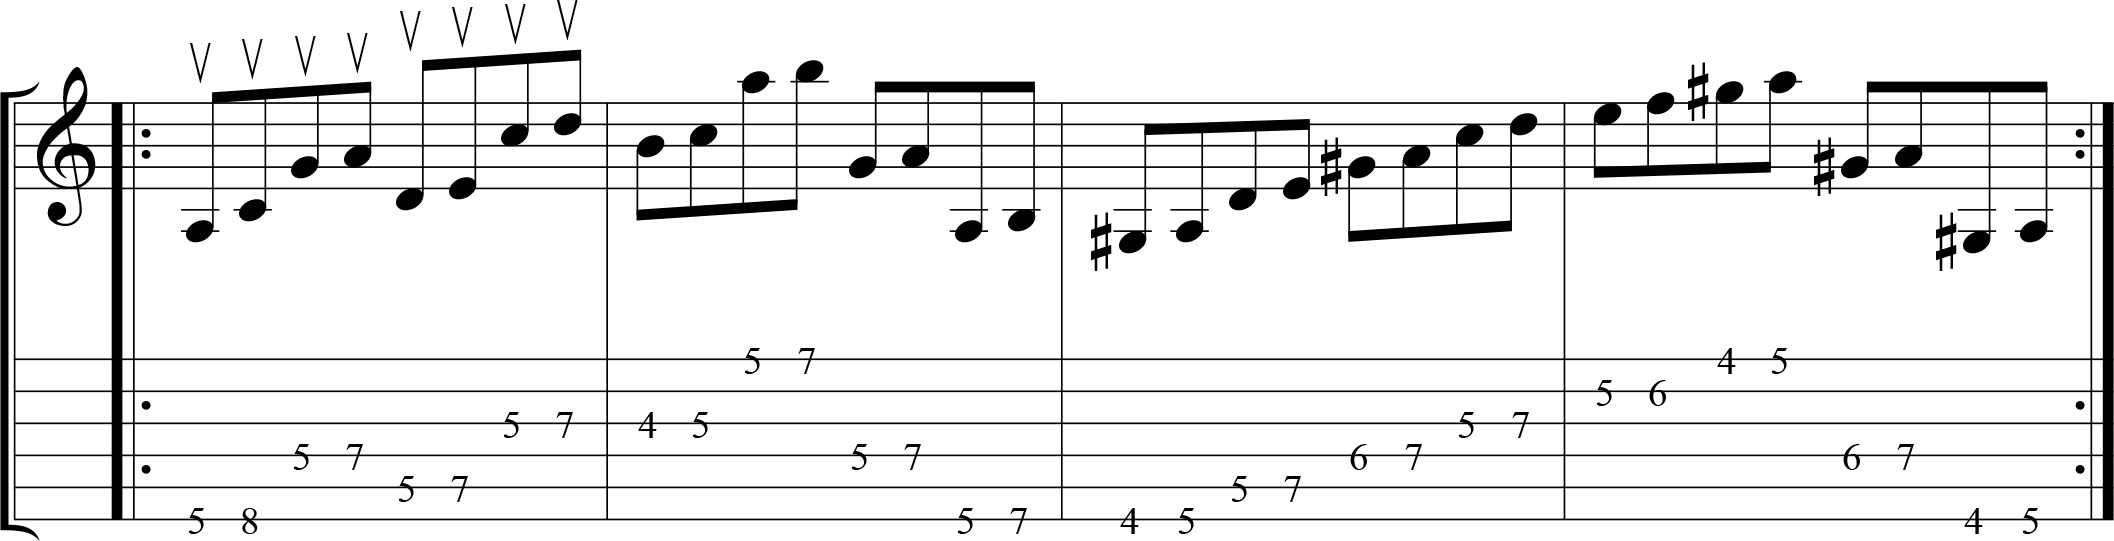 Up-picking exercise in a contemporary musical style.